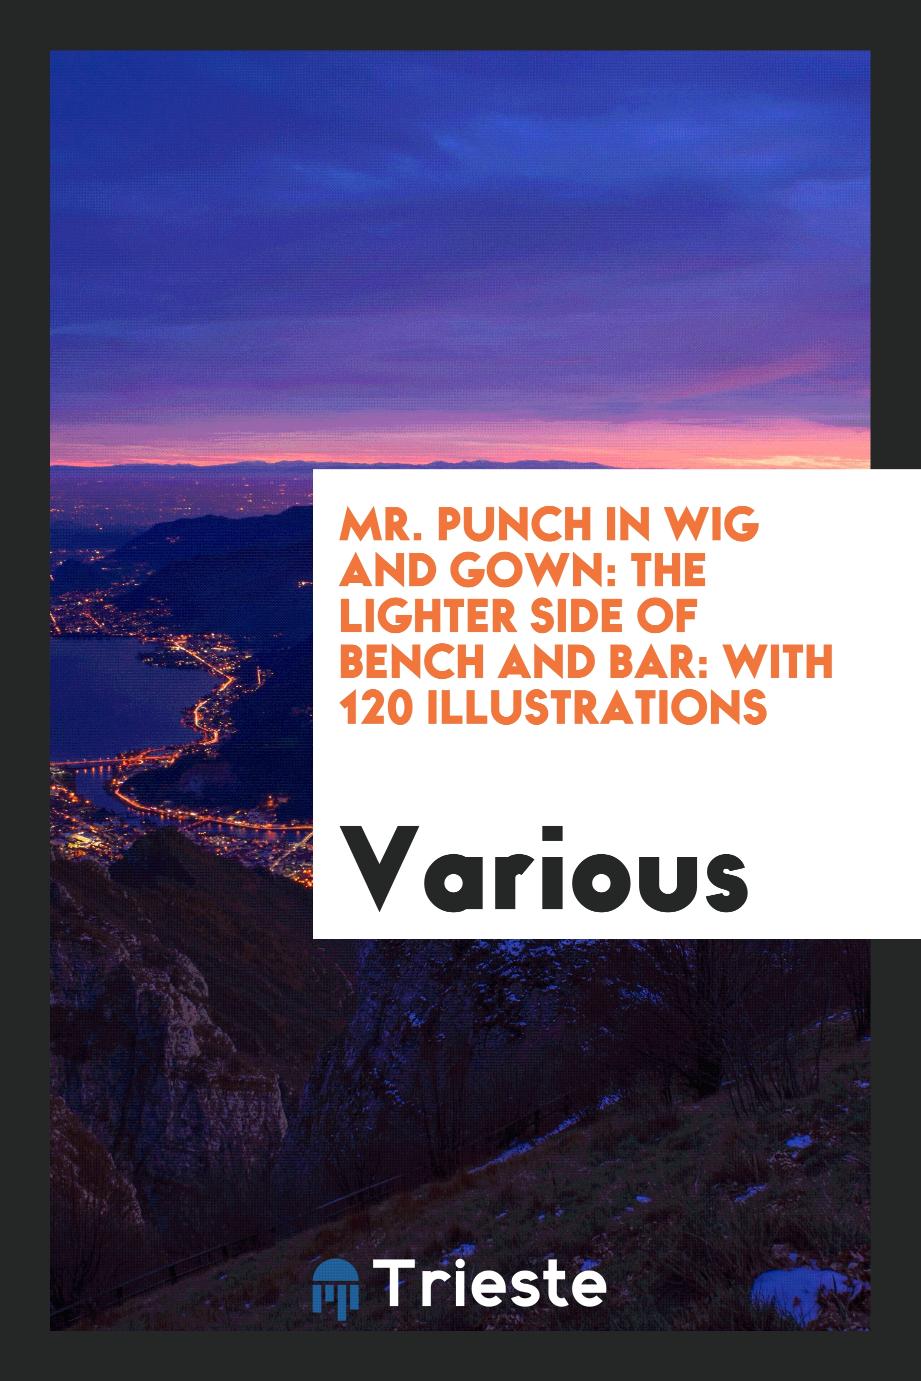 Mr. Punch in wig and gown: the lighter side of bench and bar: with 120 illustrations